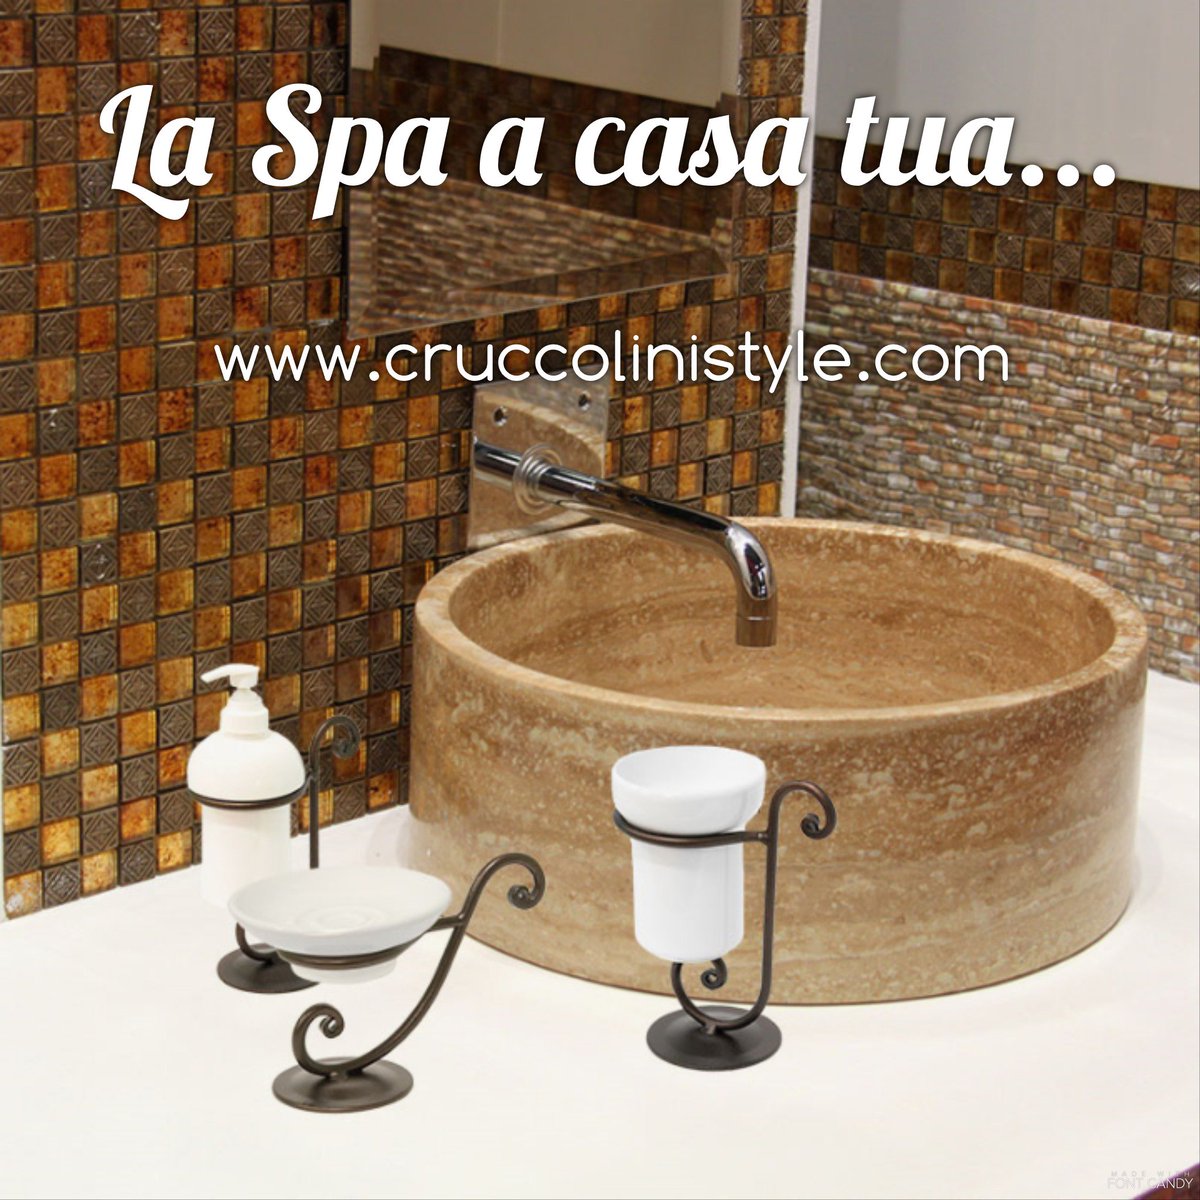 Have a relaxing spa day at home! Check out our bathroom accessories at cruccolinistyle.com
#design #madeintialy